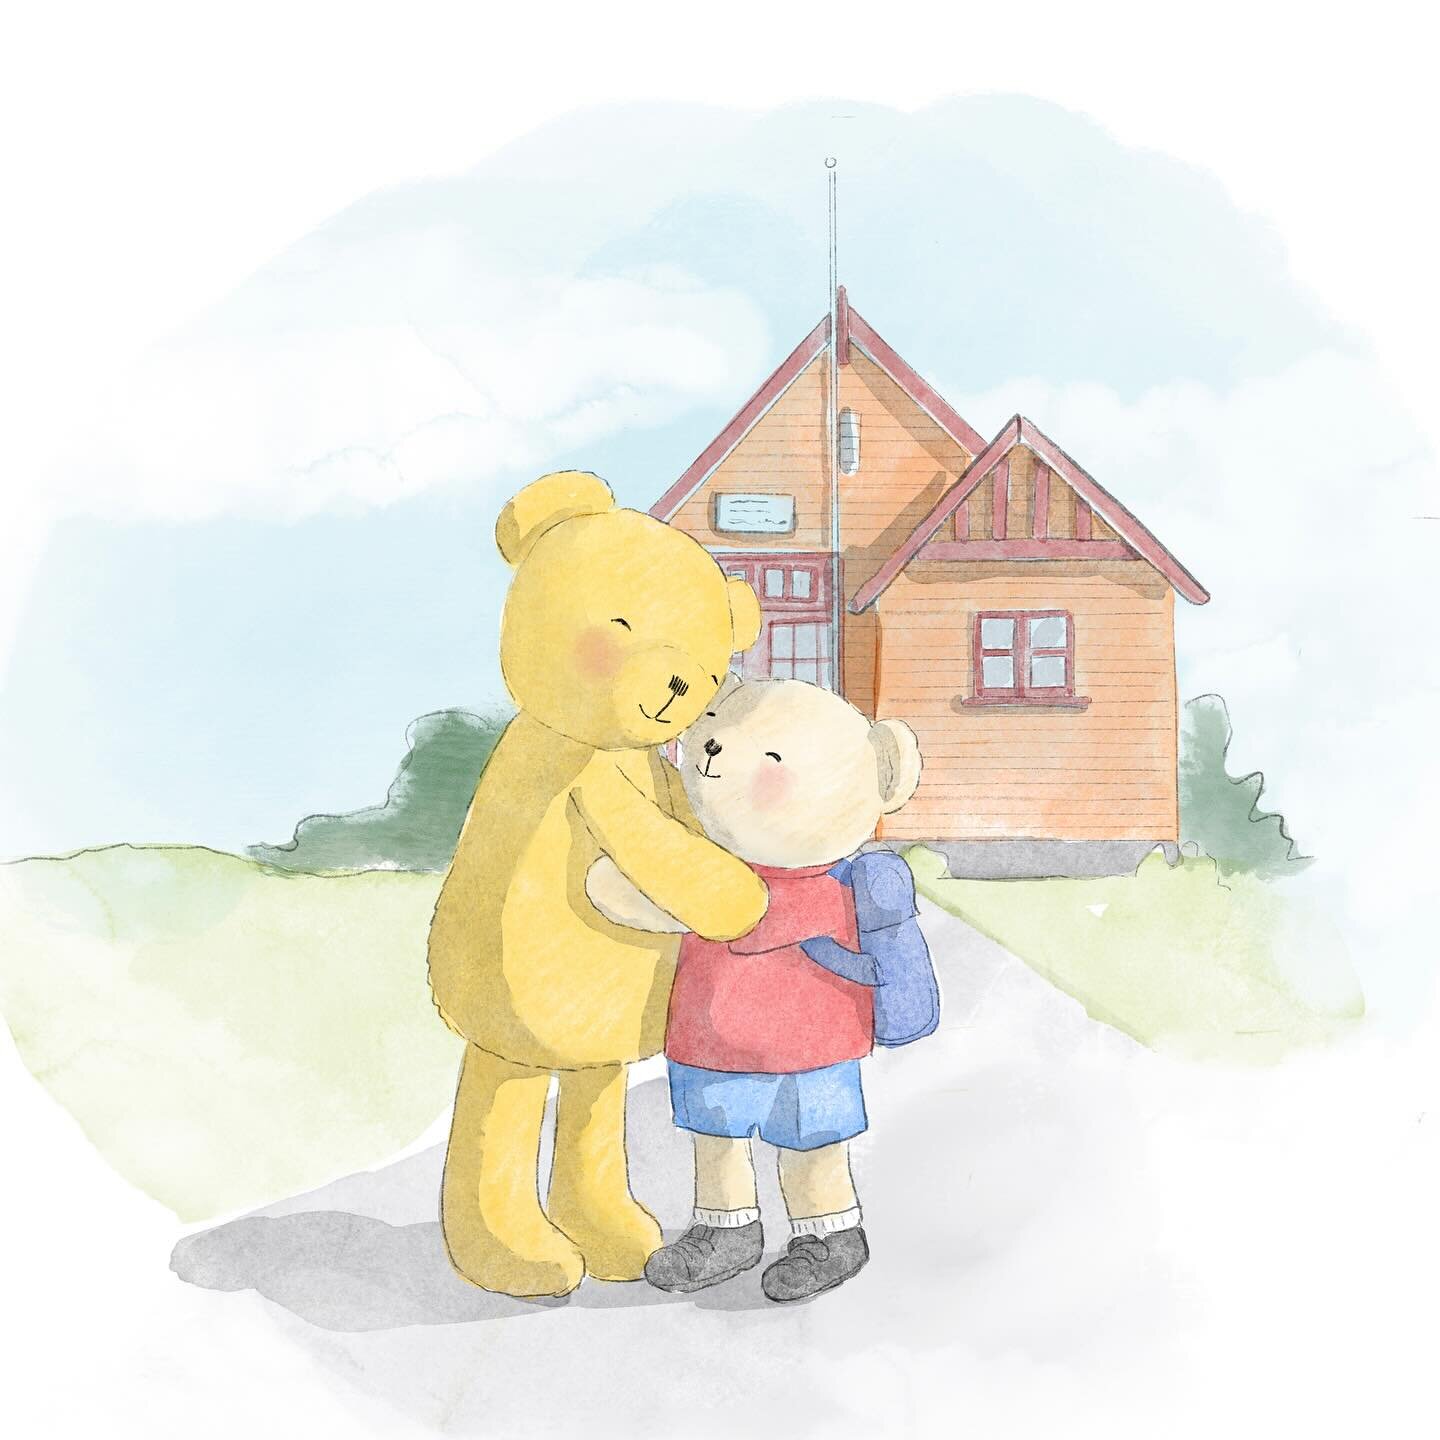 Back to school! 
The biggest hugs to all the little ones heading off on their first day this week. And maybe some reassuring hugs for the parents as well 🥰